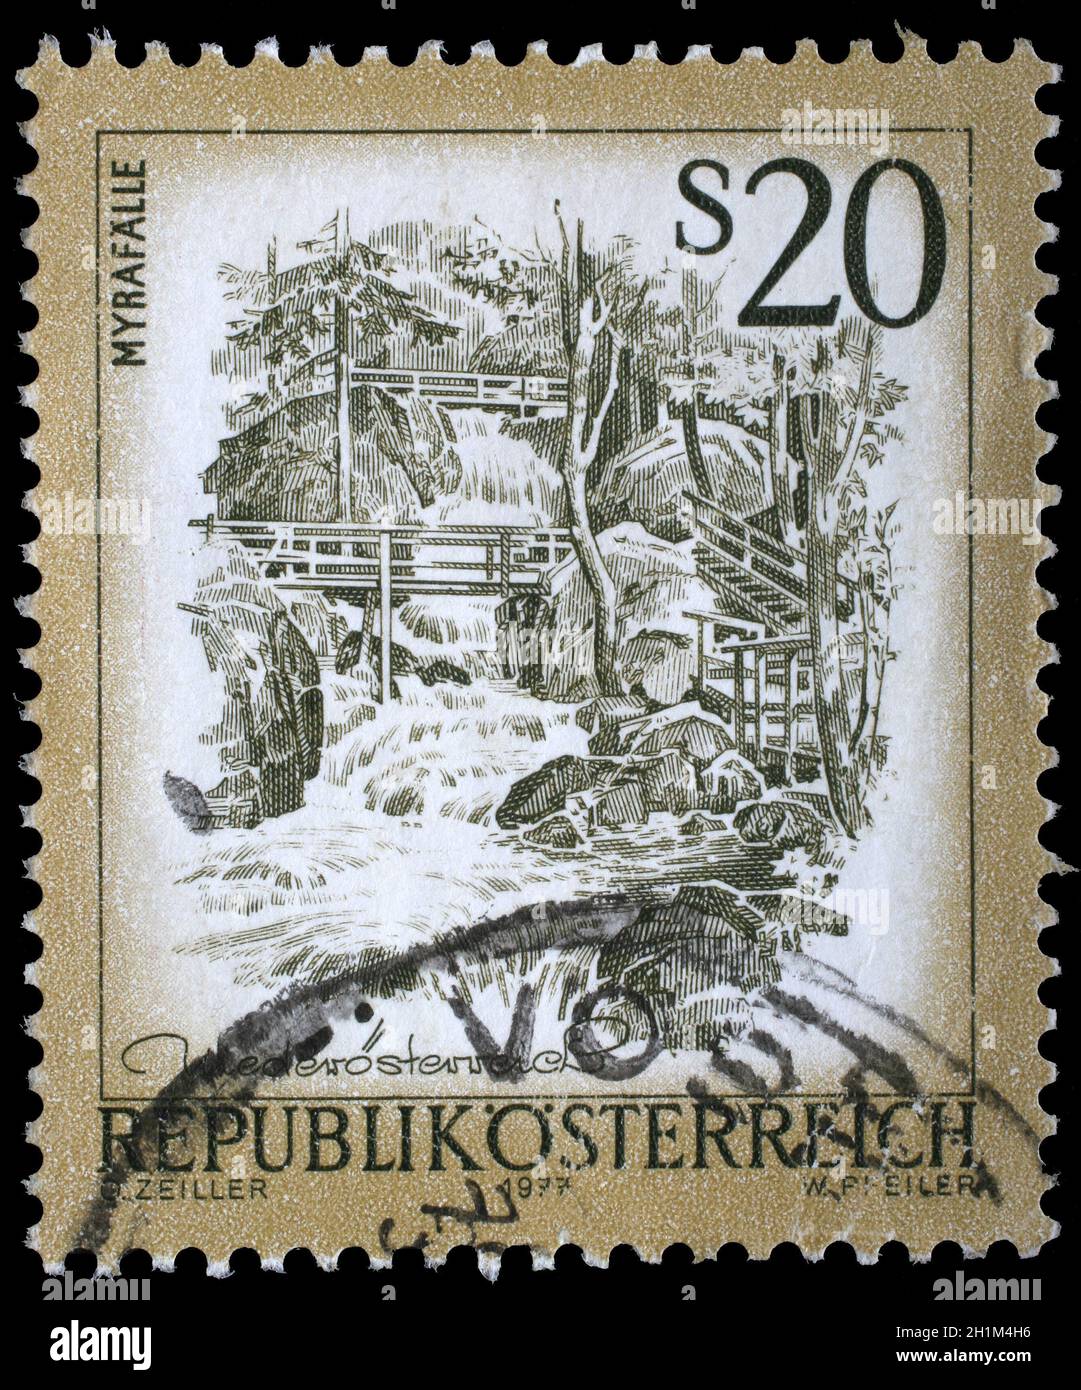 Stamp printed in Austria shows Myrafalle, from the series 'Sights in Austria', circa 1977. Stock Photo